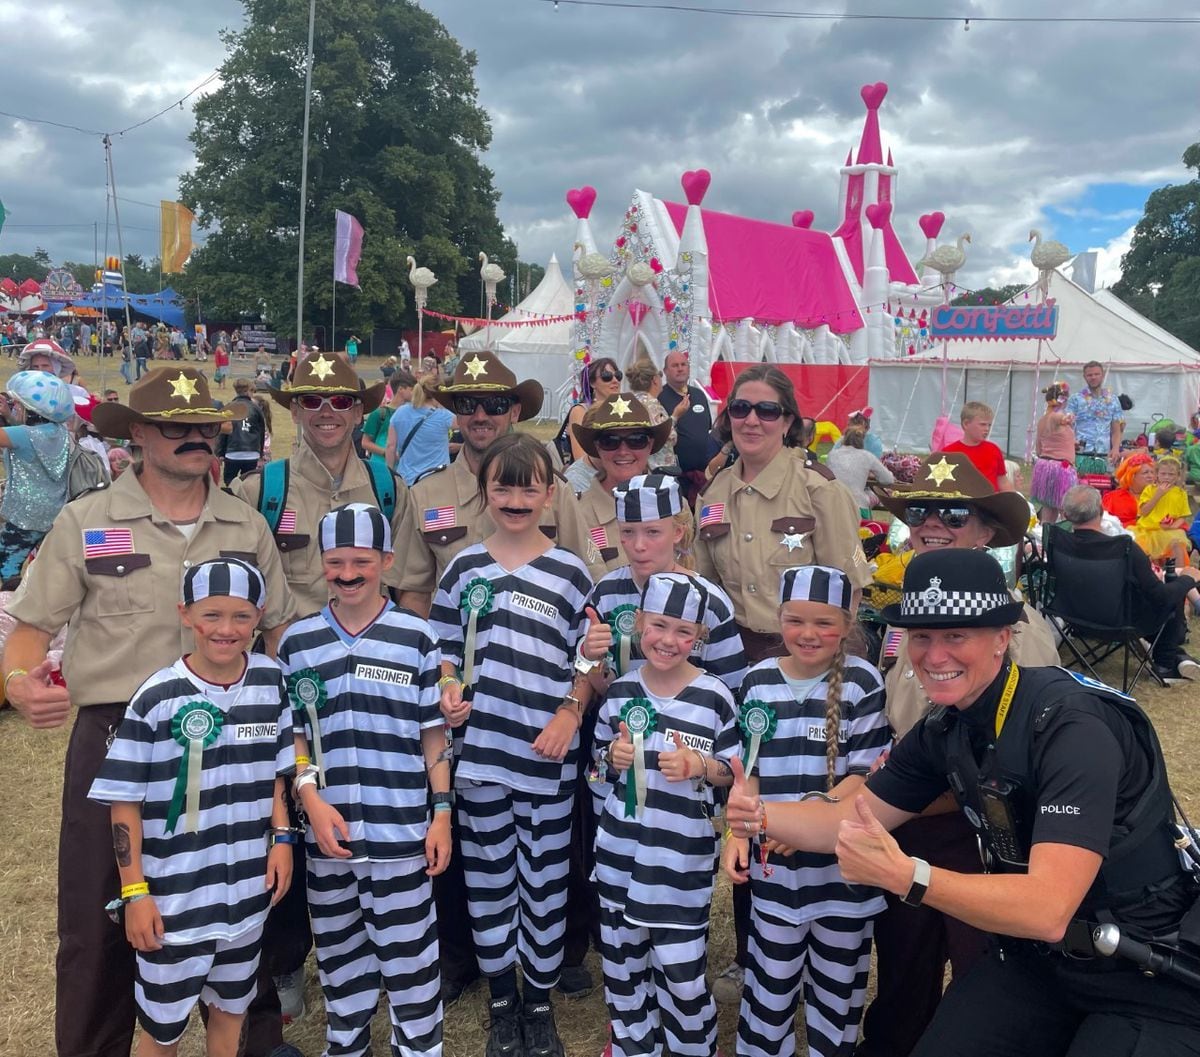 Sgt Helen Ceresa from Staffordshire Police at Bestival. Pic by Sarah Derry.